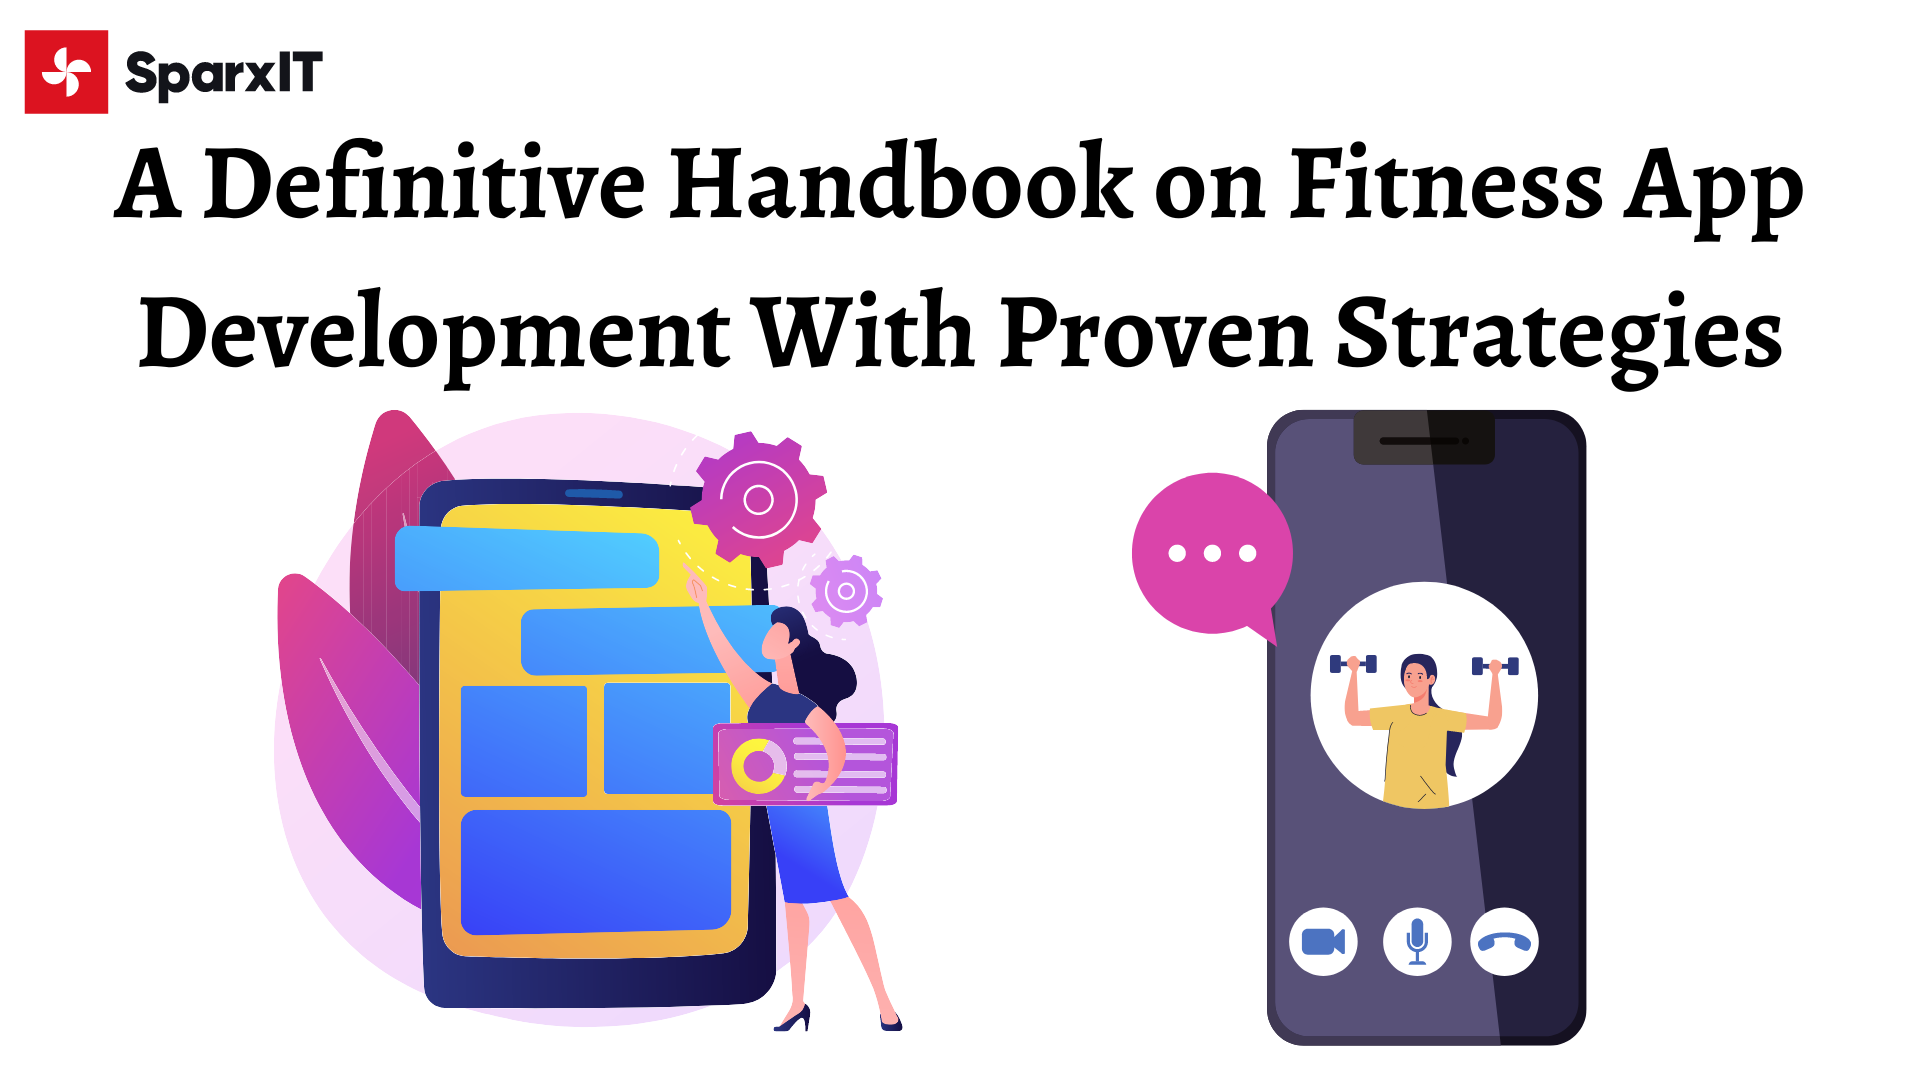 A Definitive Handbook on Fitness App Development With Proven Strategies